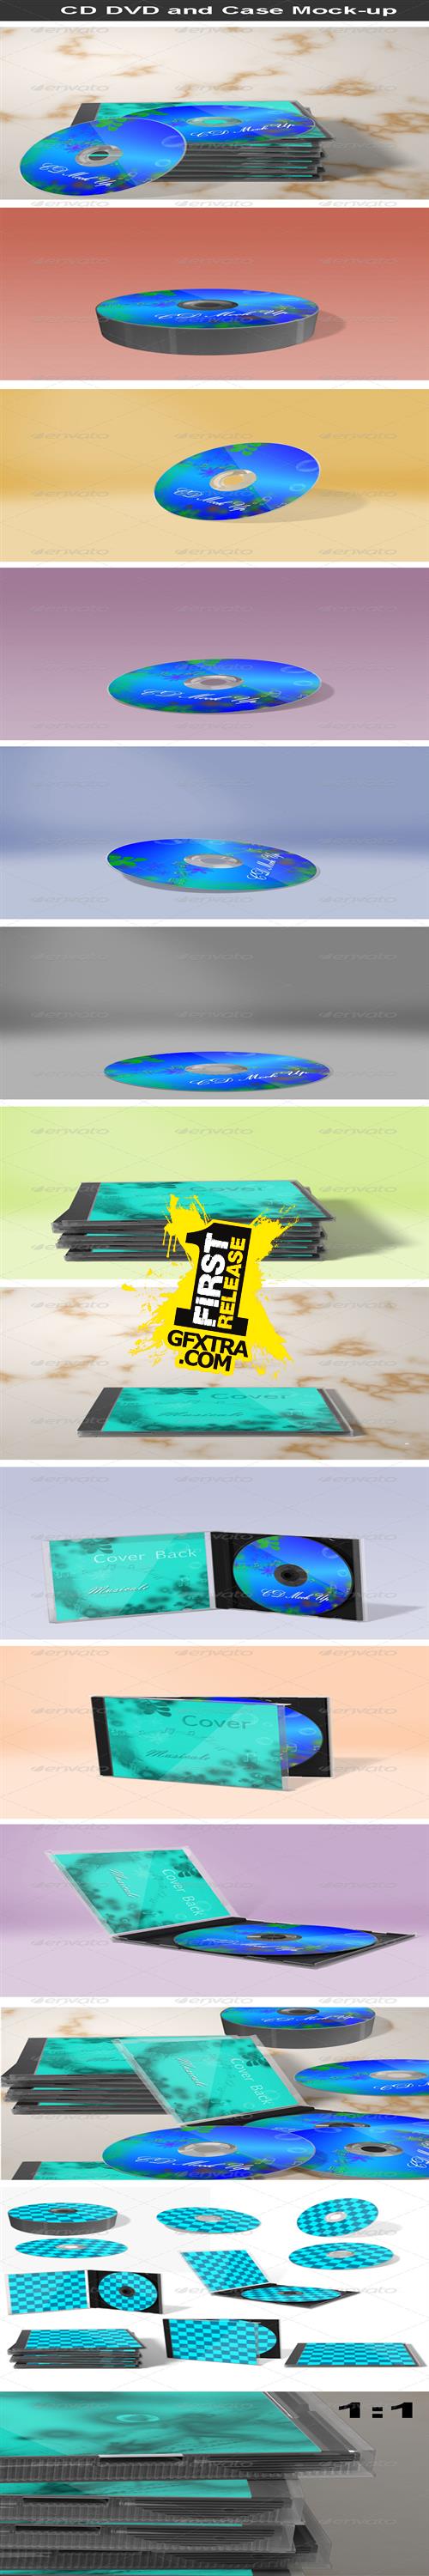 GraphicRiver - CD DVD and Case Mock-up